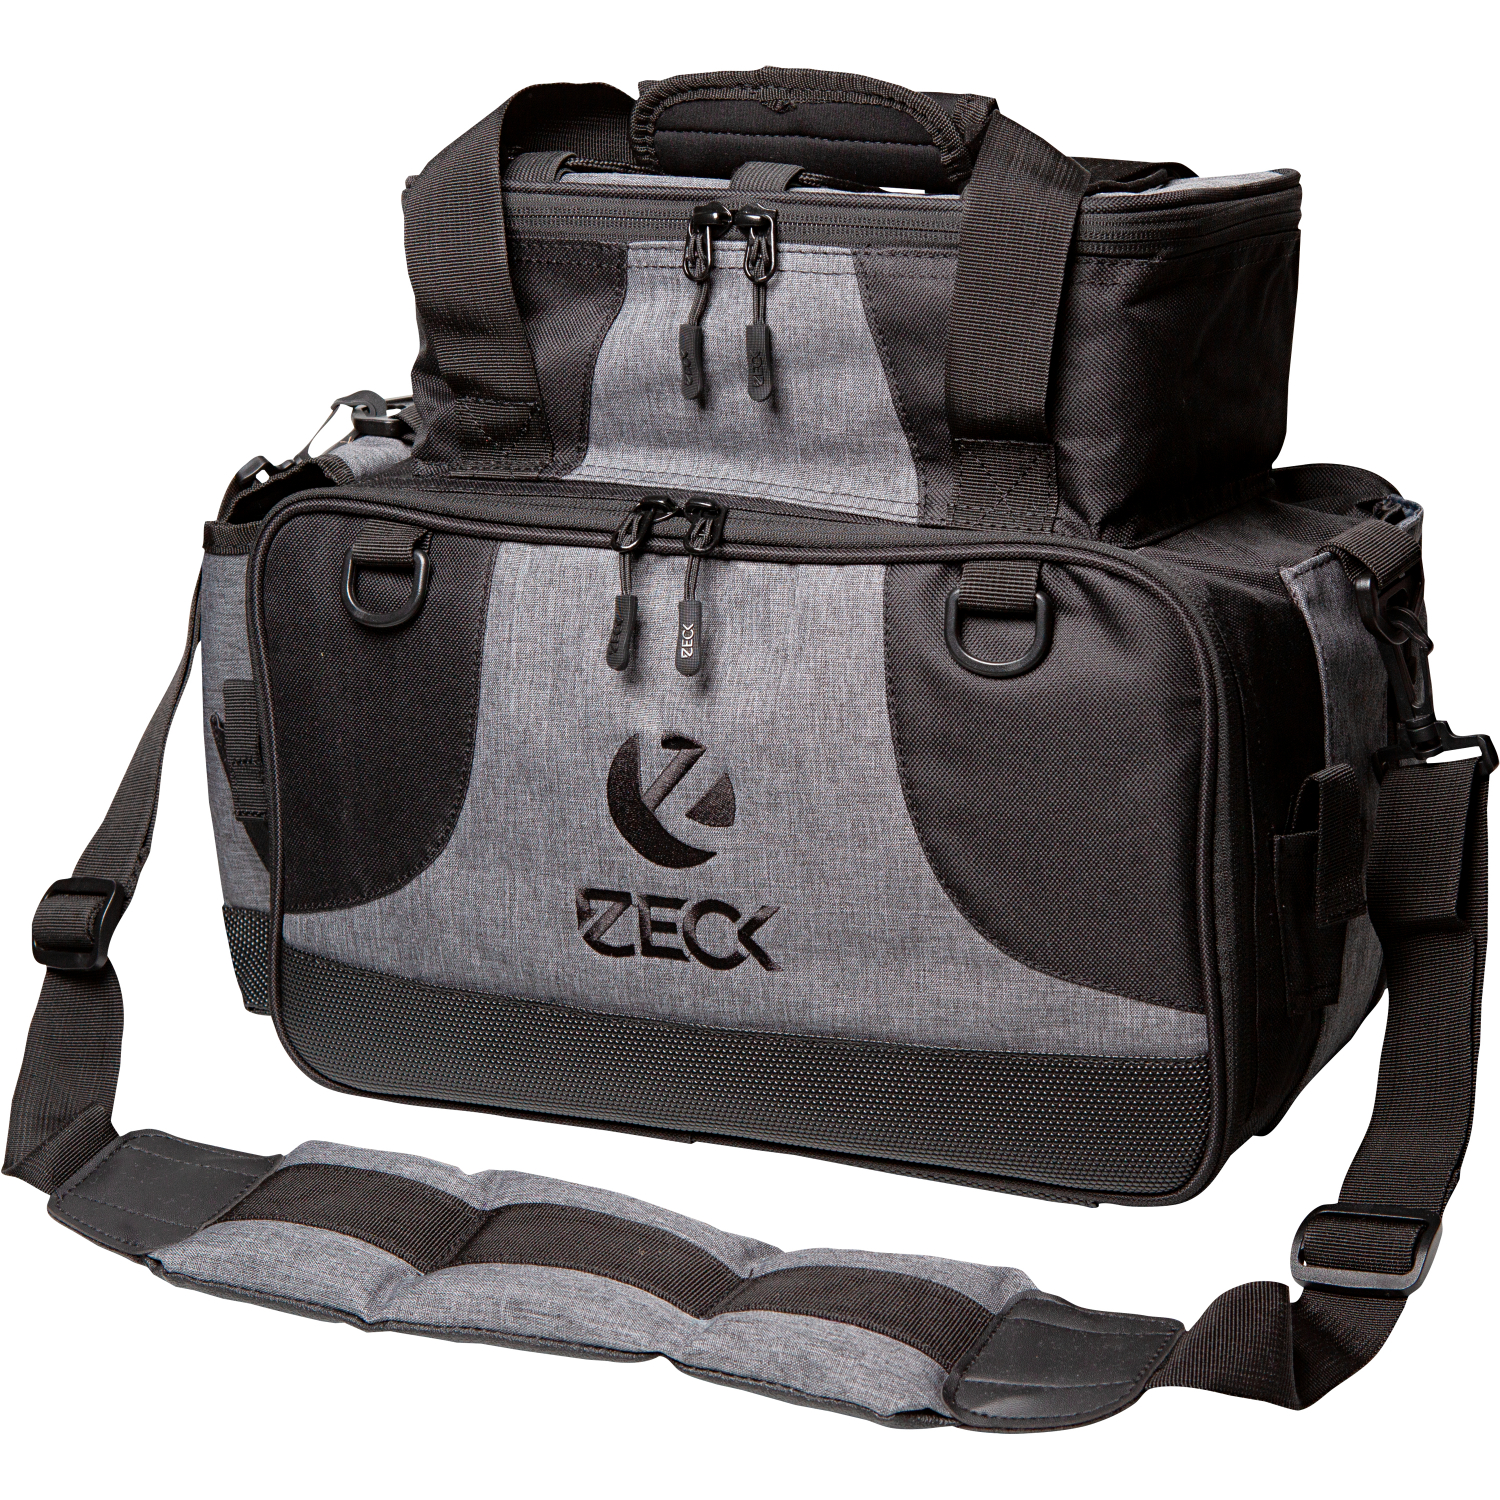 Zeck Tackle Container Pro Predator L Fishing Bag for Fishing